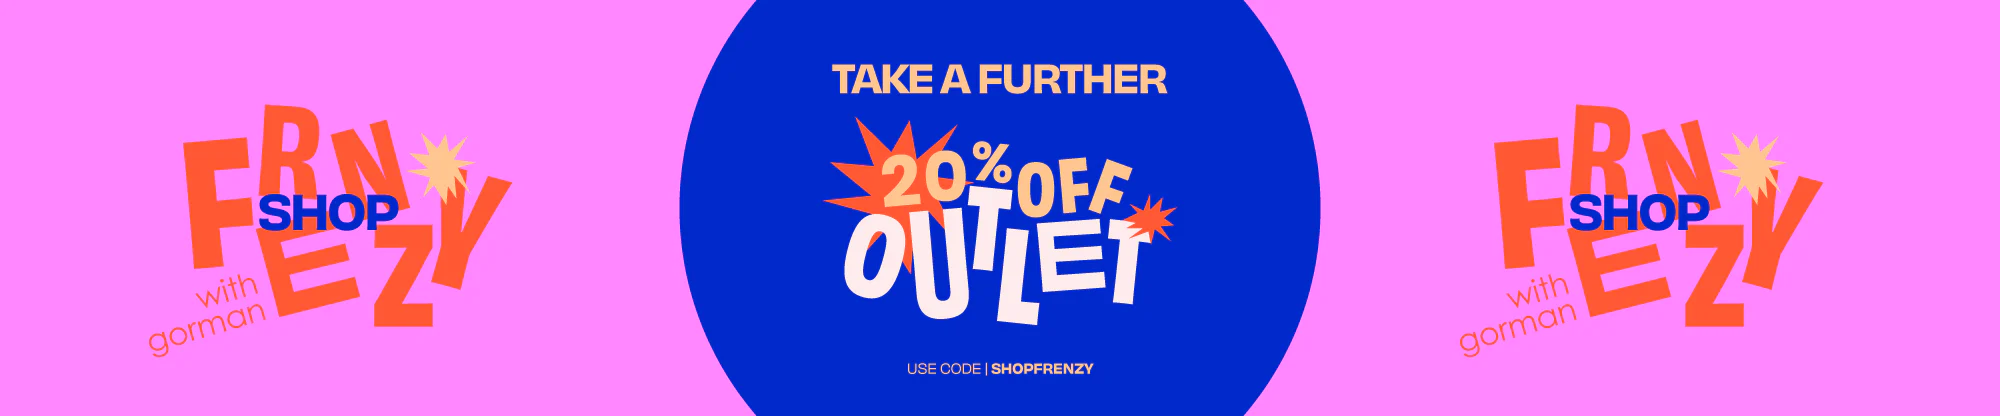 Gorman Frenzy sale - Further 20% OFF outlet styles with coupon